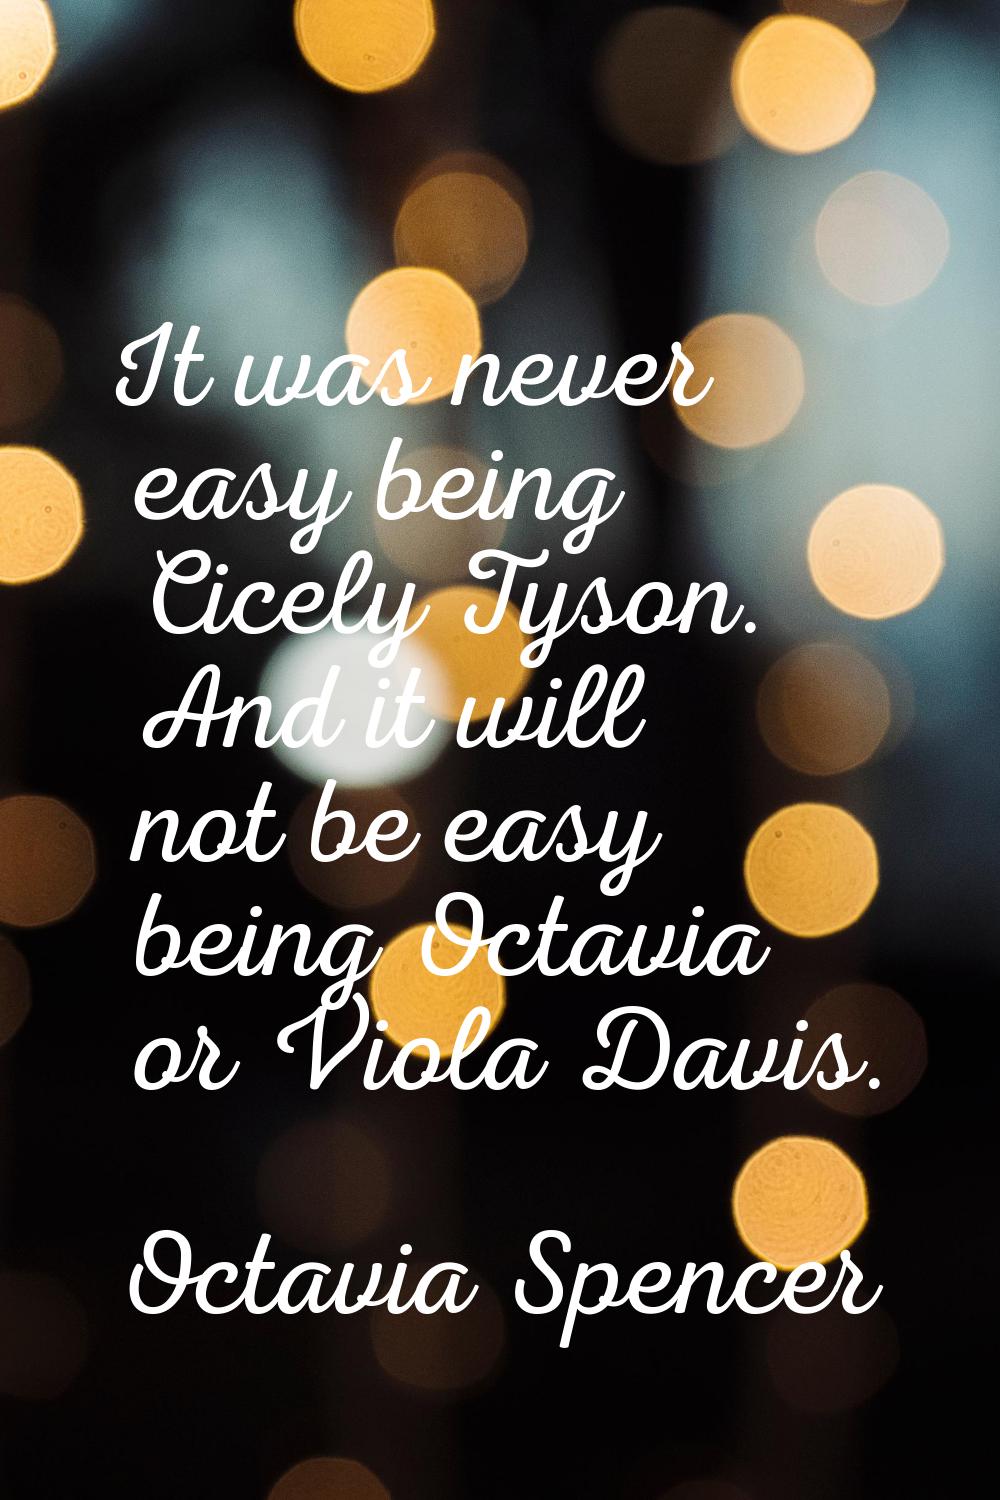 It was never easy being Cicely Tyson. And it will not be easy being Octavia or Viola Davis.